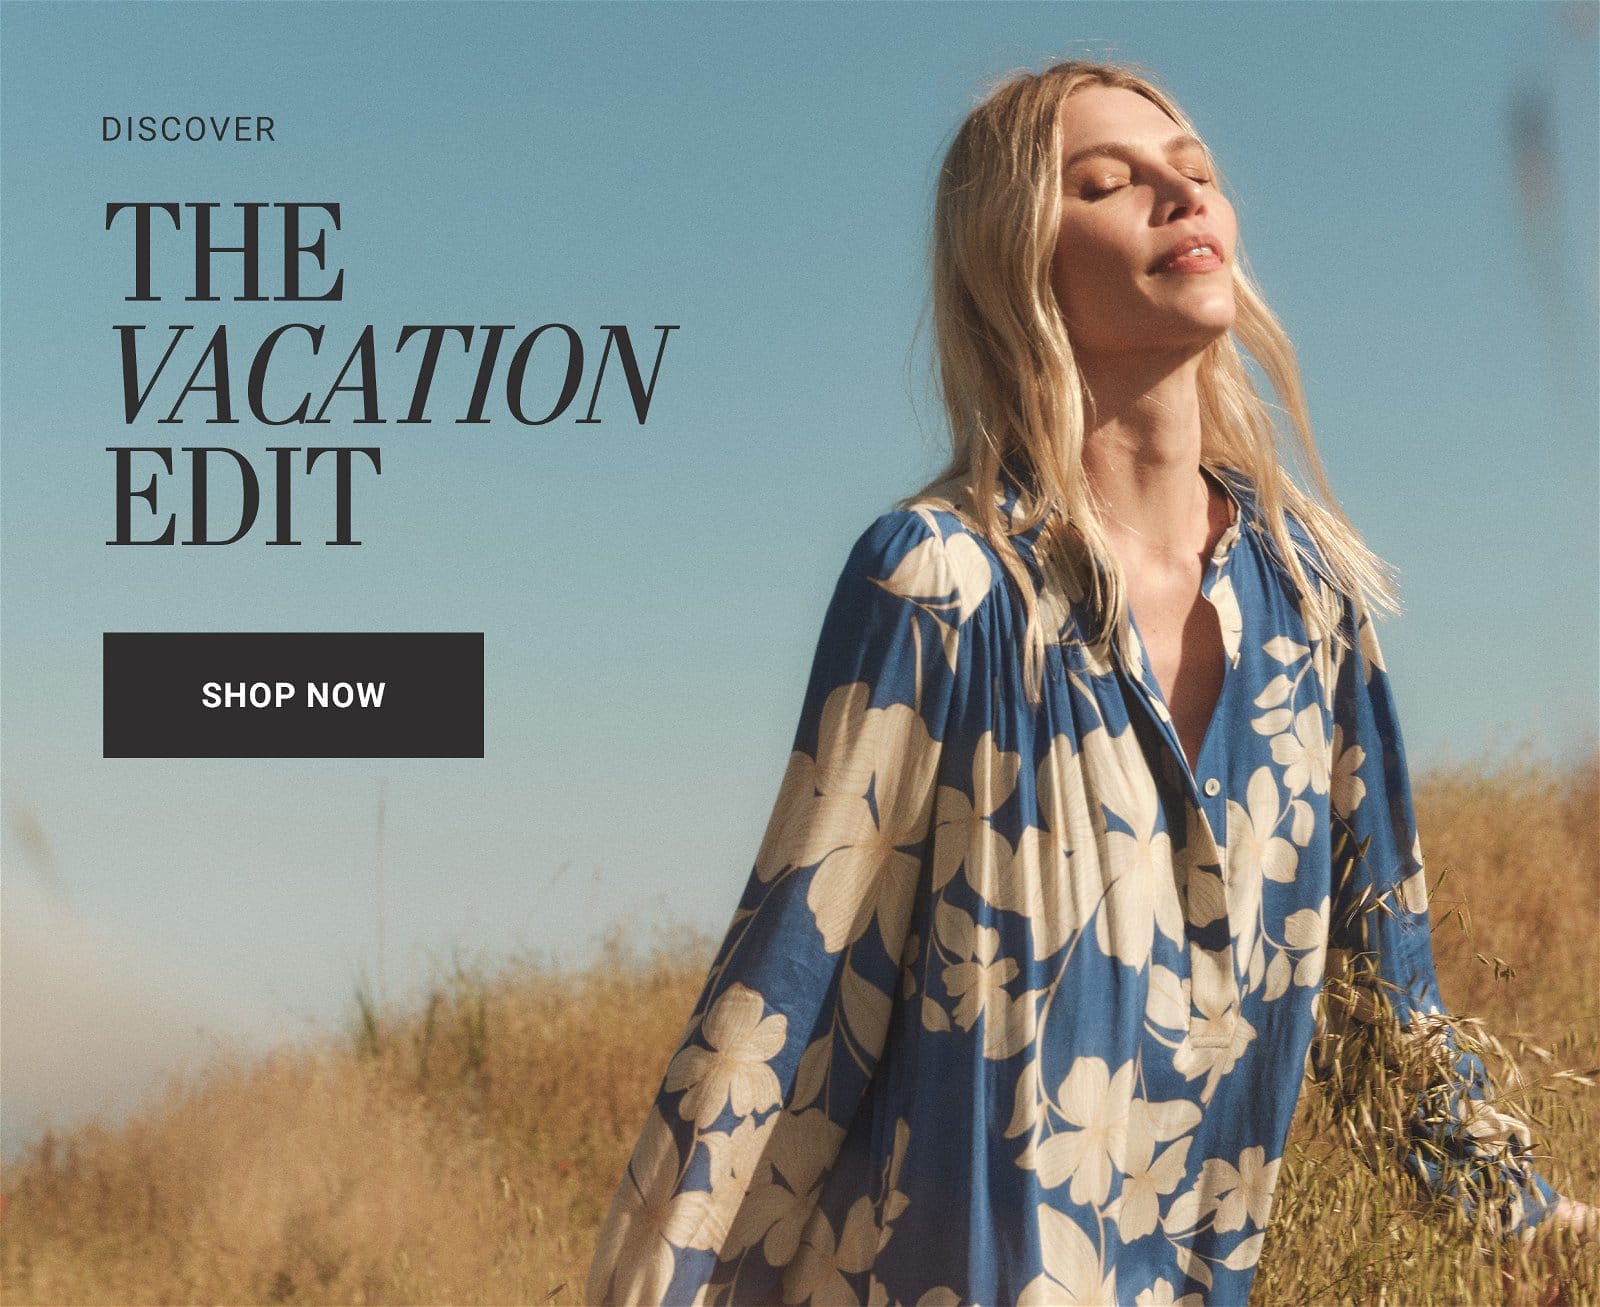 DISCOVER THE VACATION EDIT